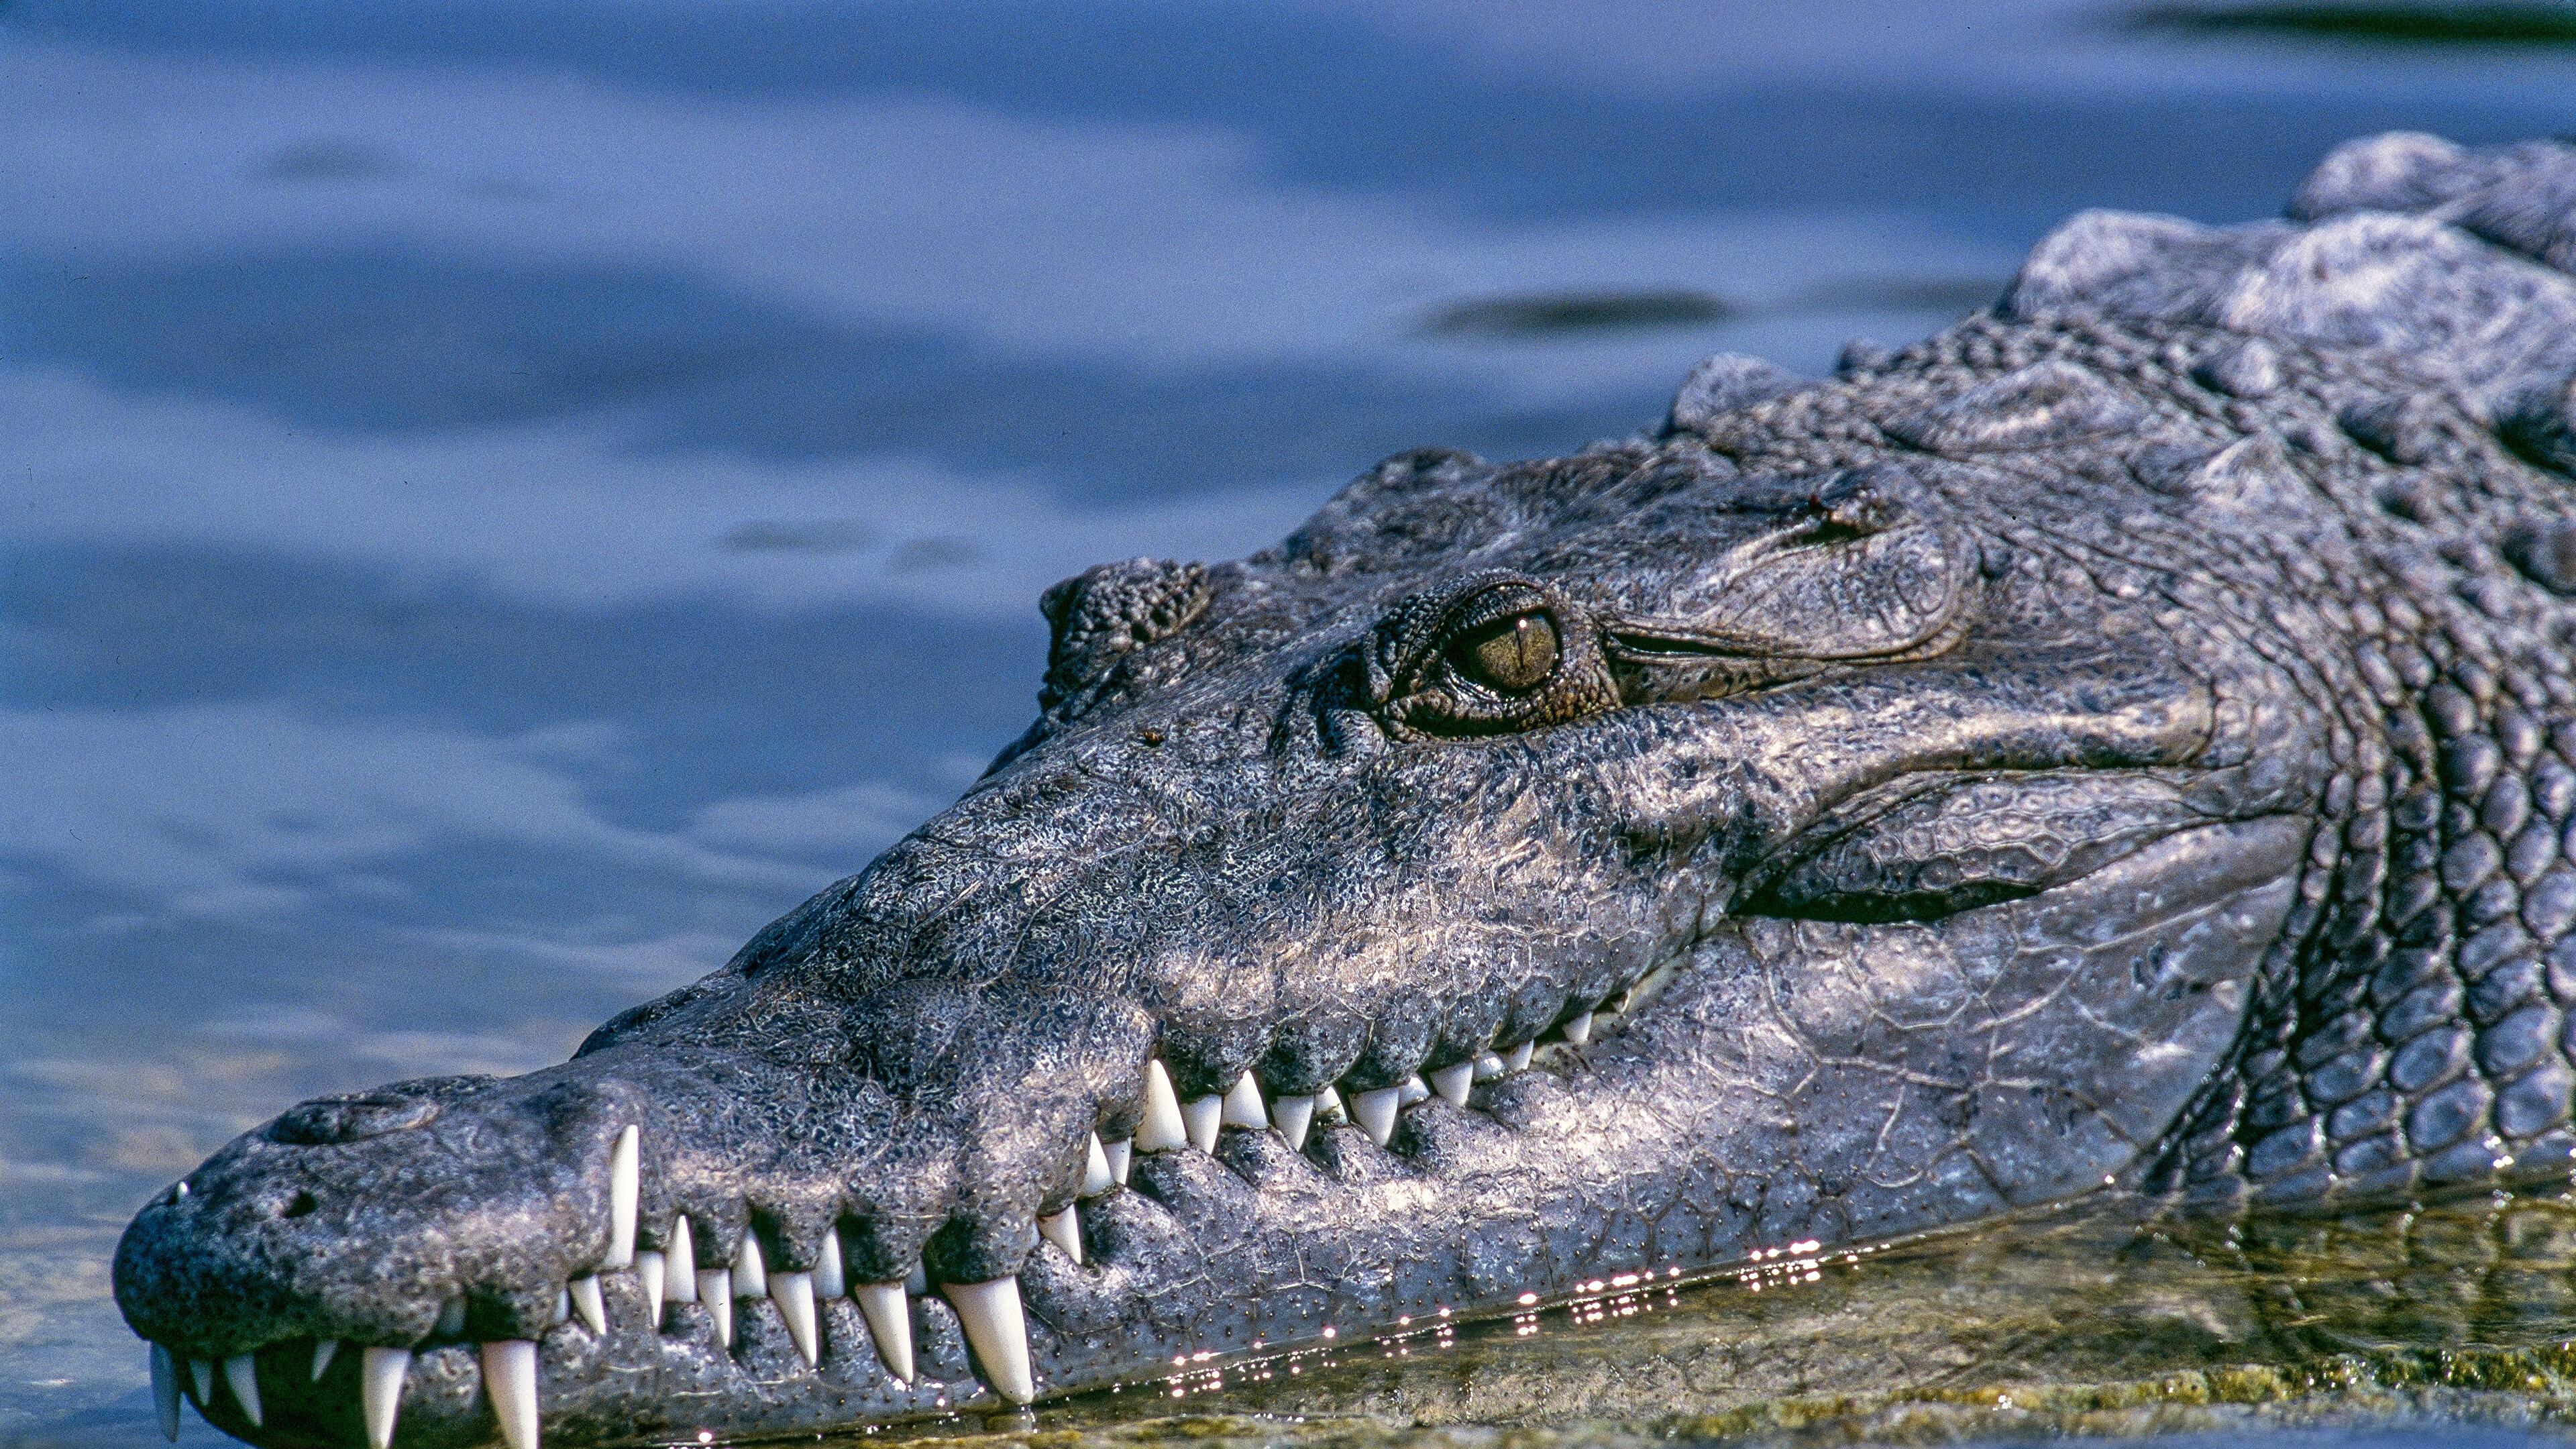 Crocodile 4K wallpaper for your desktop or mobile screen free and easy to download